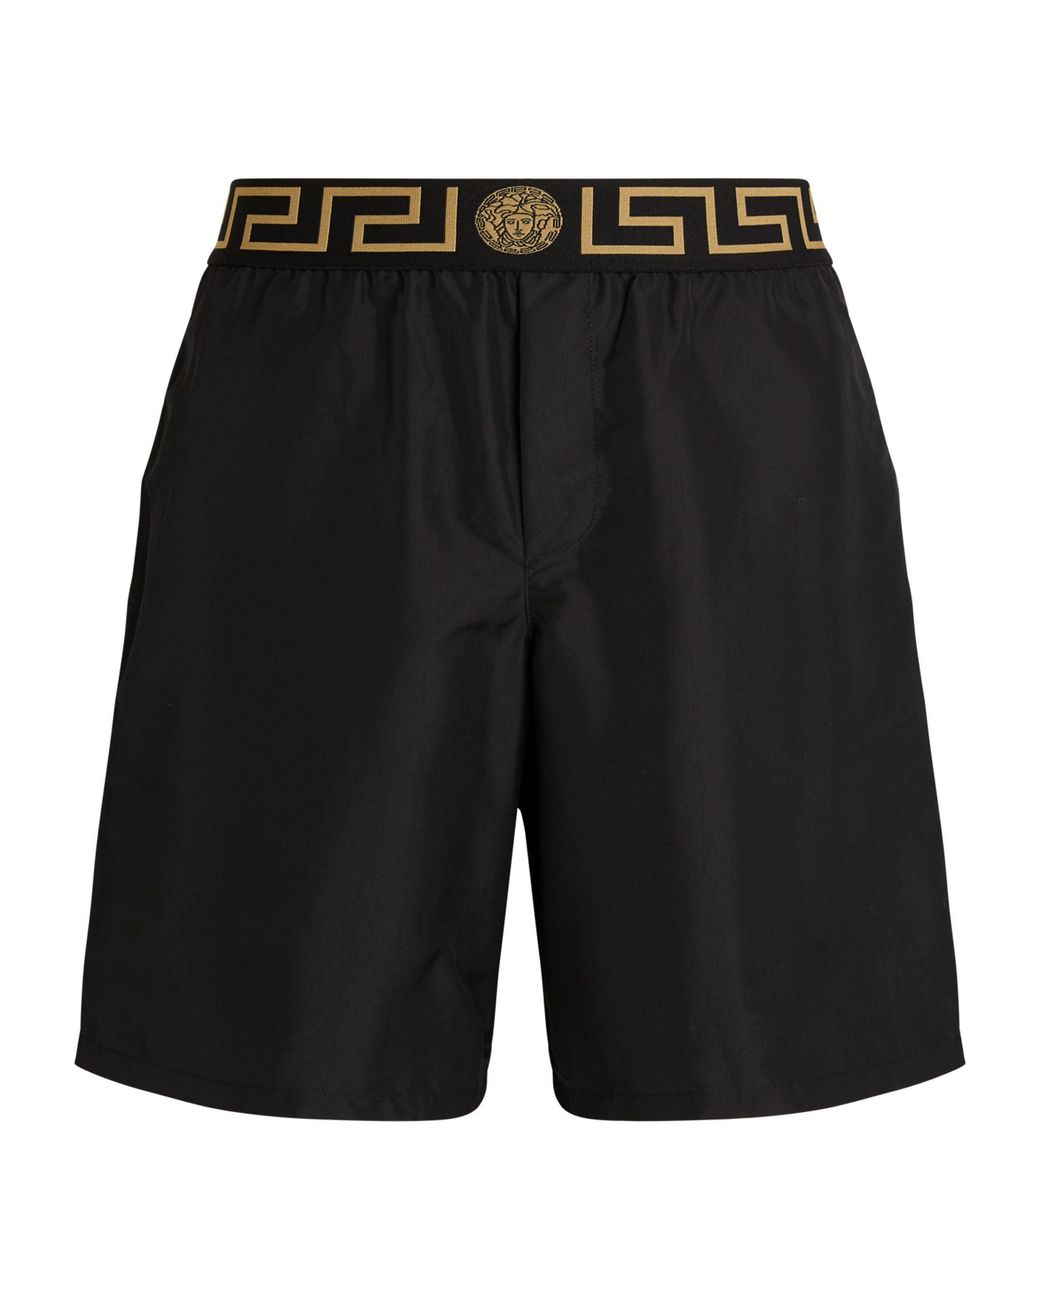 Versace Synthetic Greca Waistband Swim Shorts in Black for Men - Save